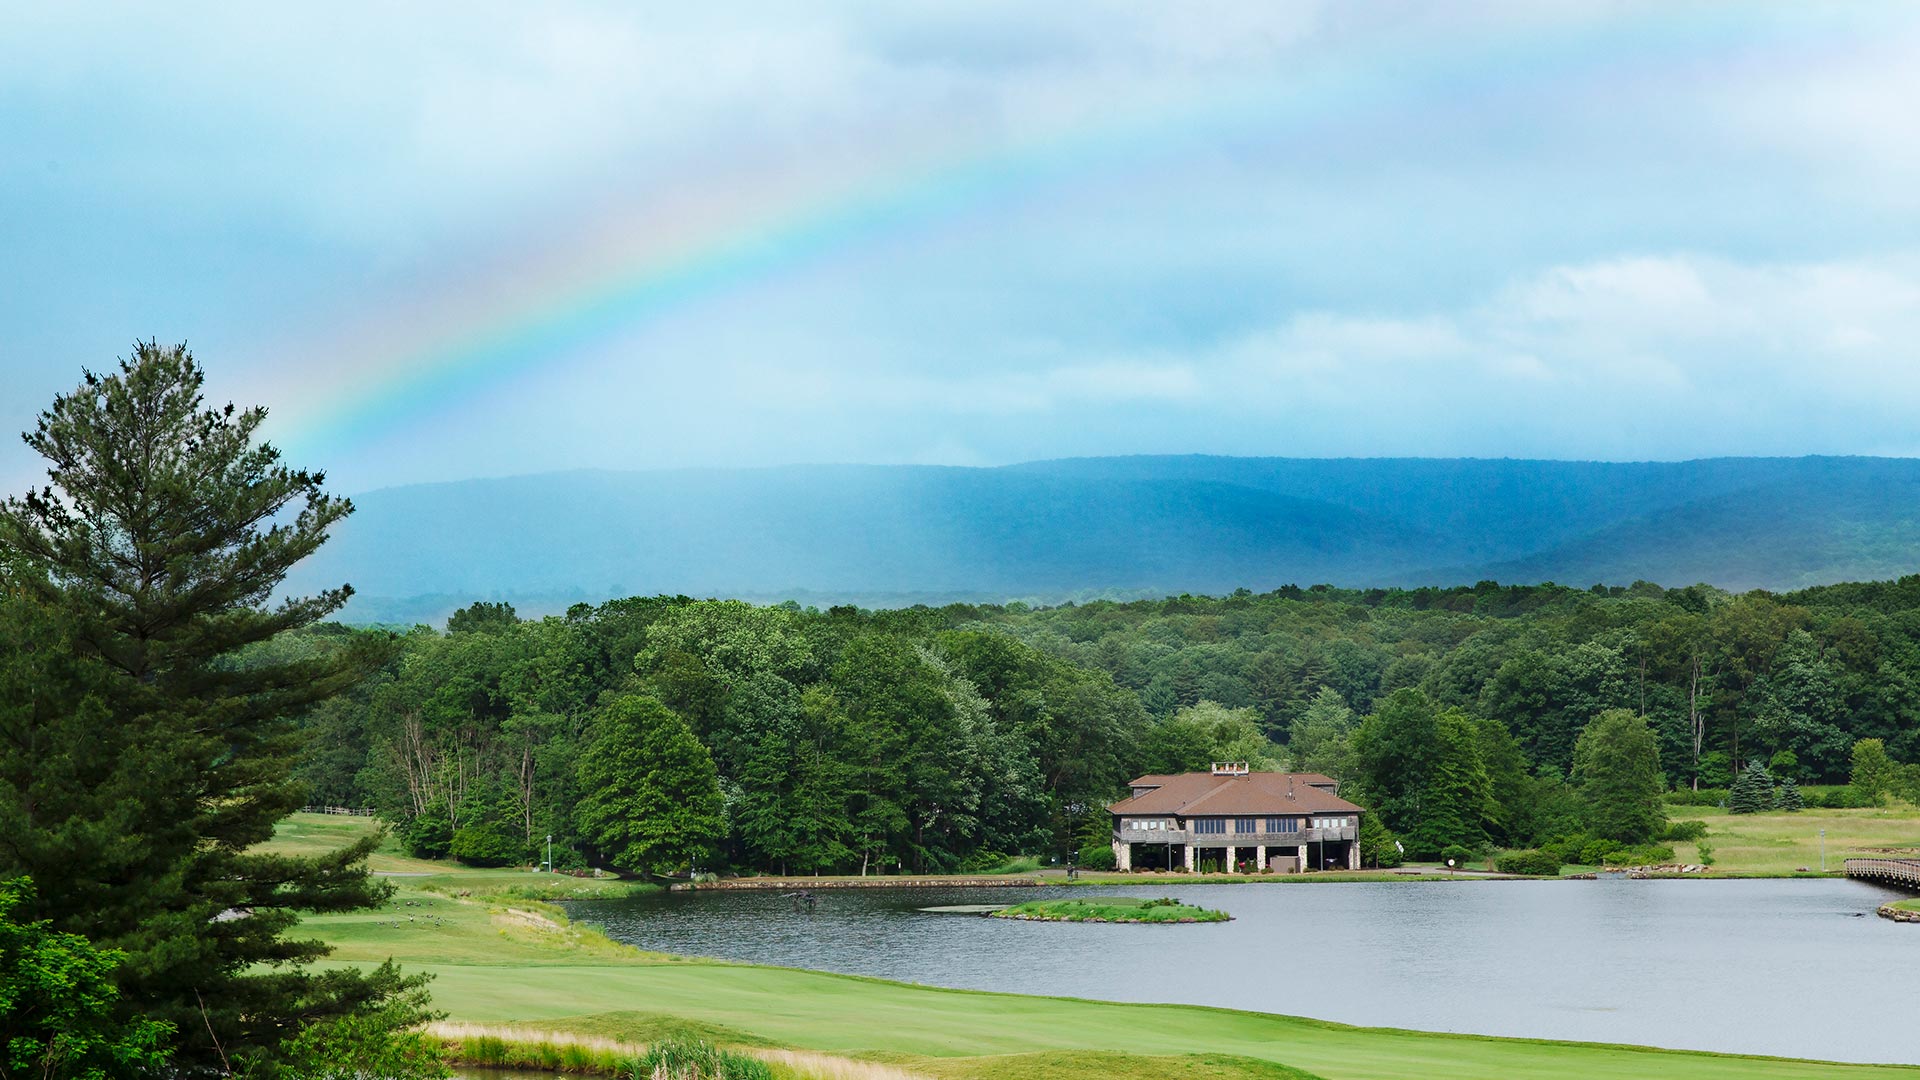 a house is perched on the lake's edge and is surrounded by forests and the golf course. There is a rainbow across the sky